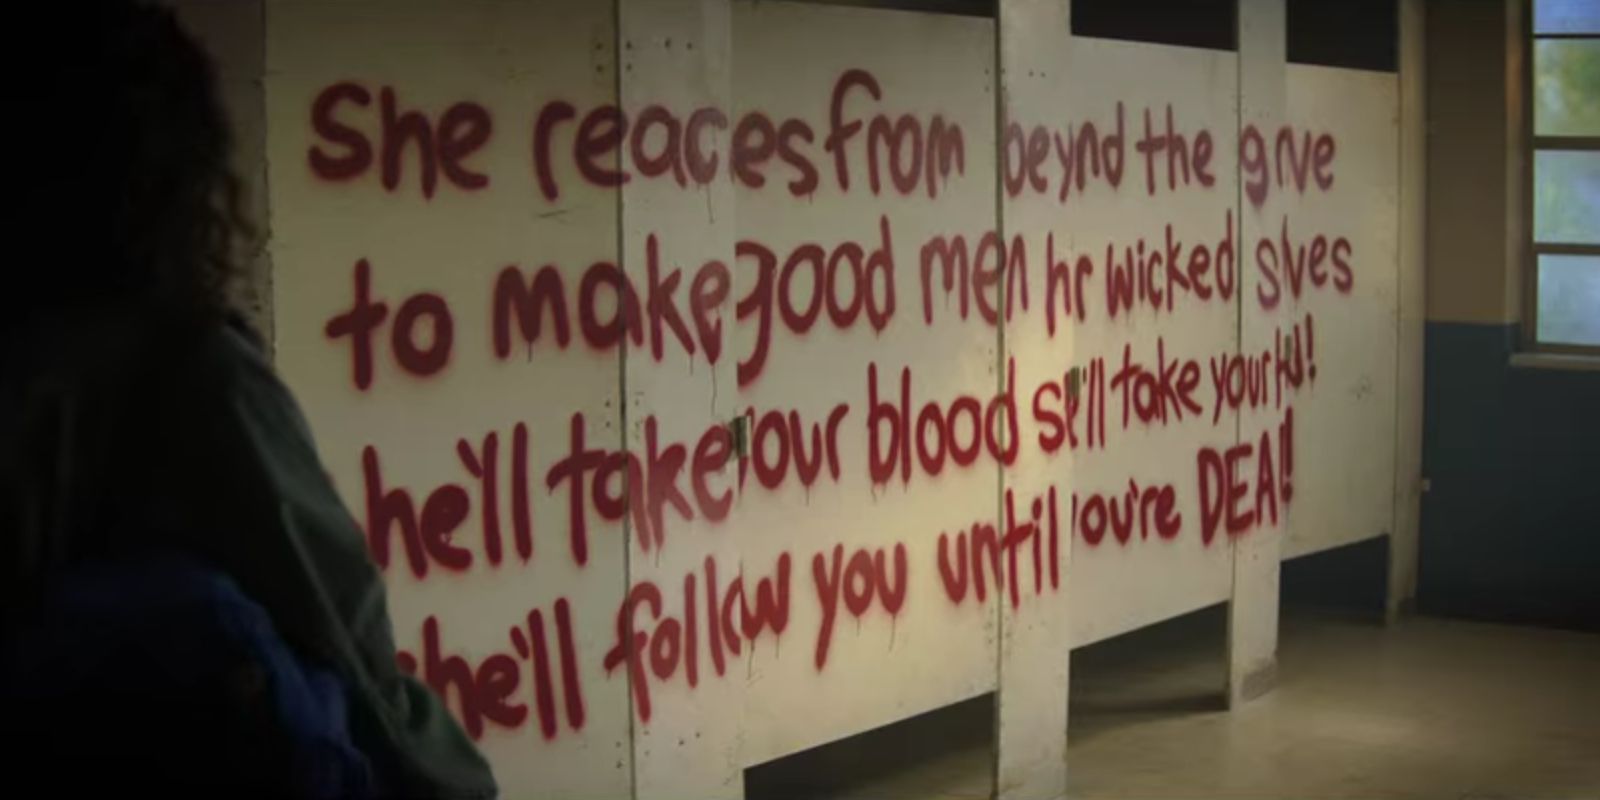 In Fear Street, spray paint on bathroom stalls reads &quot;She reaches from beyond the grave to make good men her wicked slaves. She'll take your blood. She'll take your head. She'll follow you until you're DEAD!&quot;